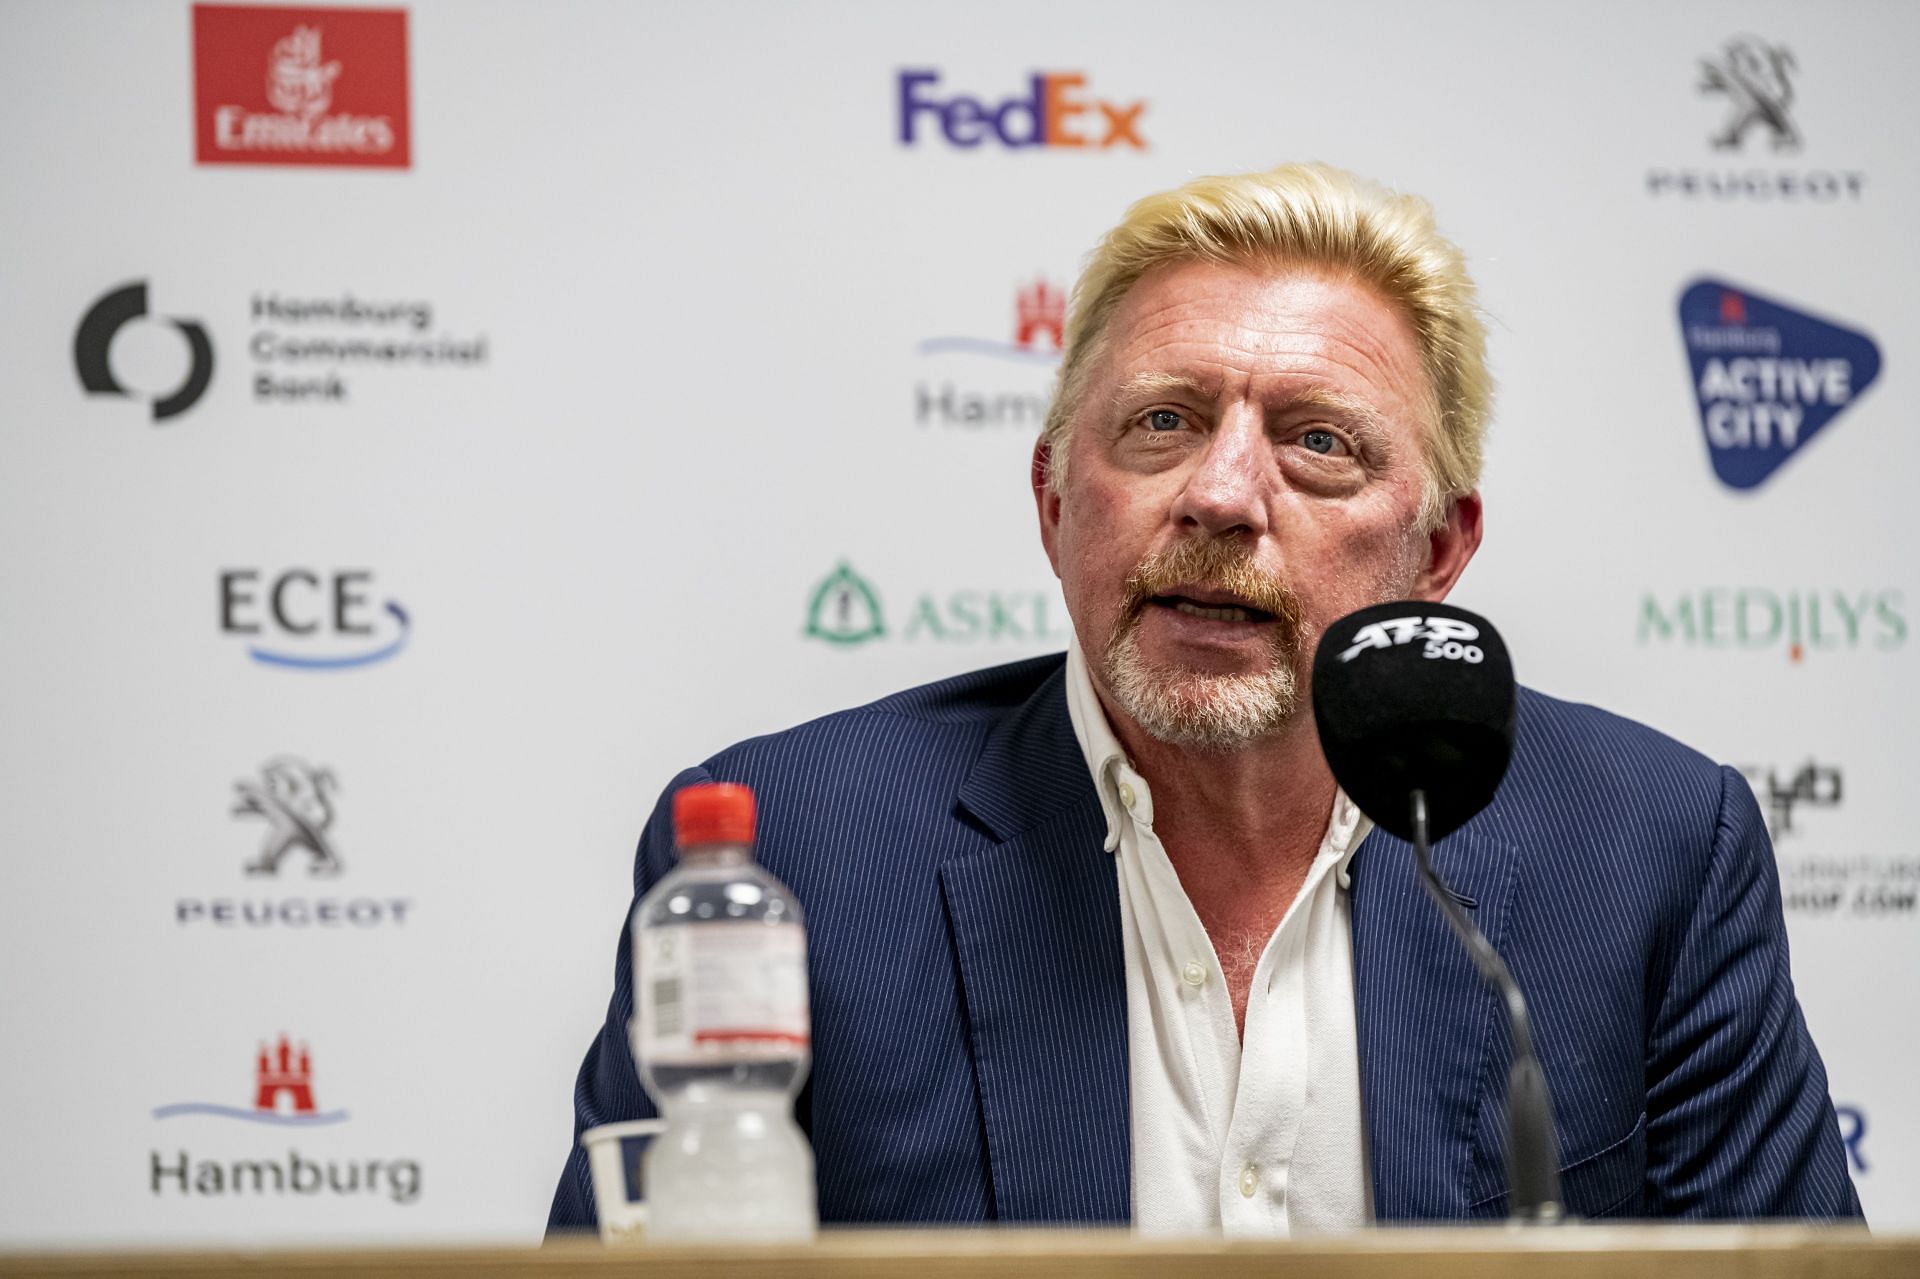 Boris Becker pictured in a press conference.